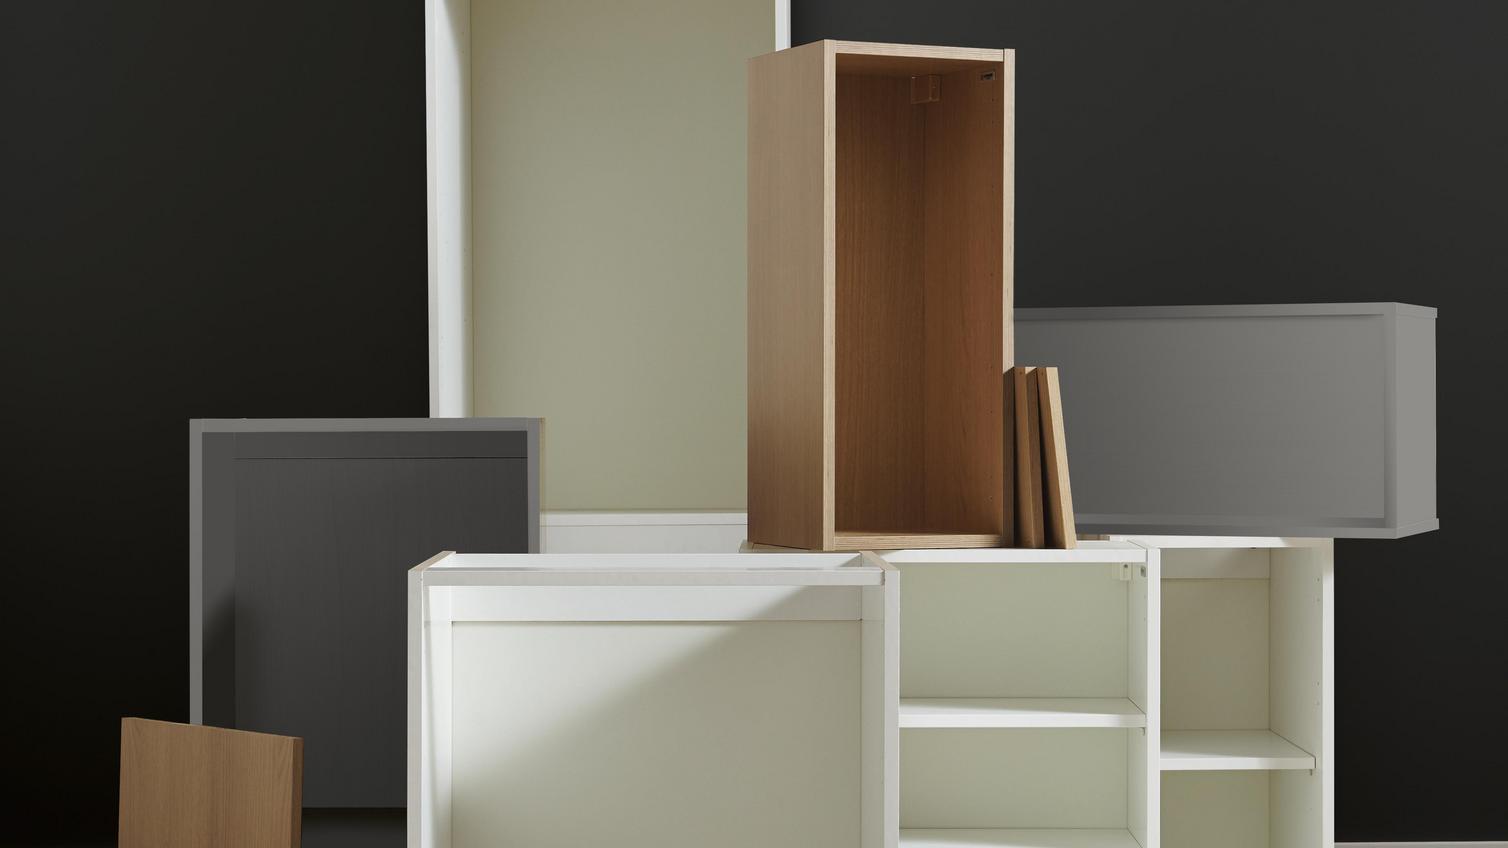 A selection of different wooden cabinetry